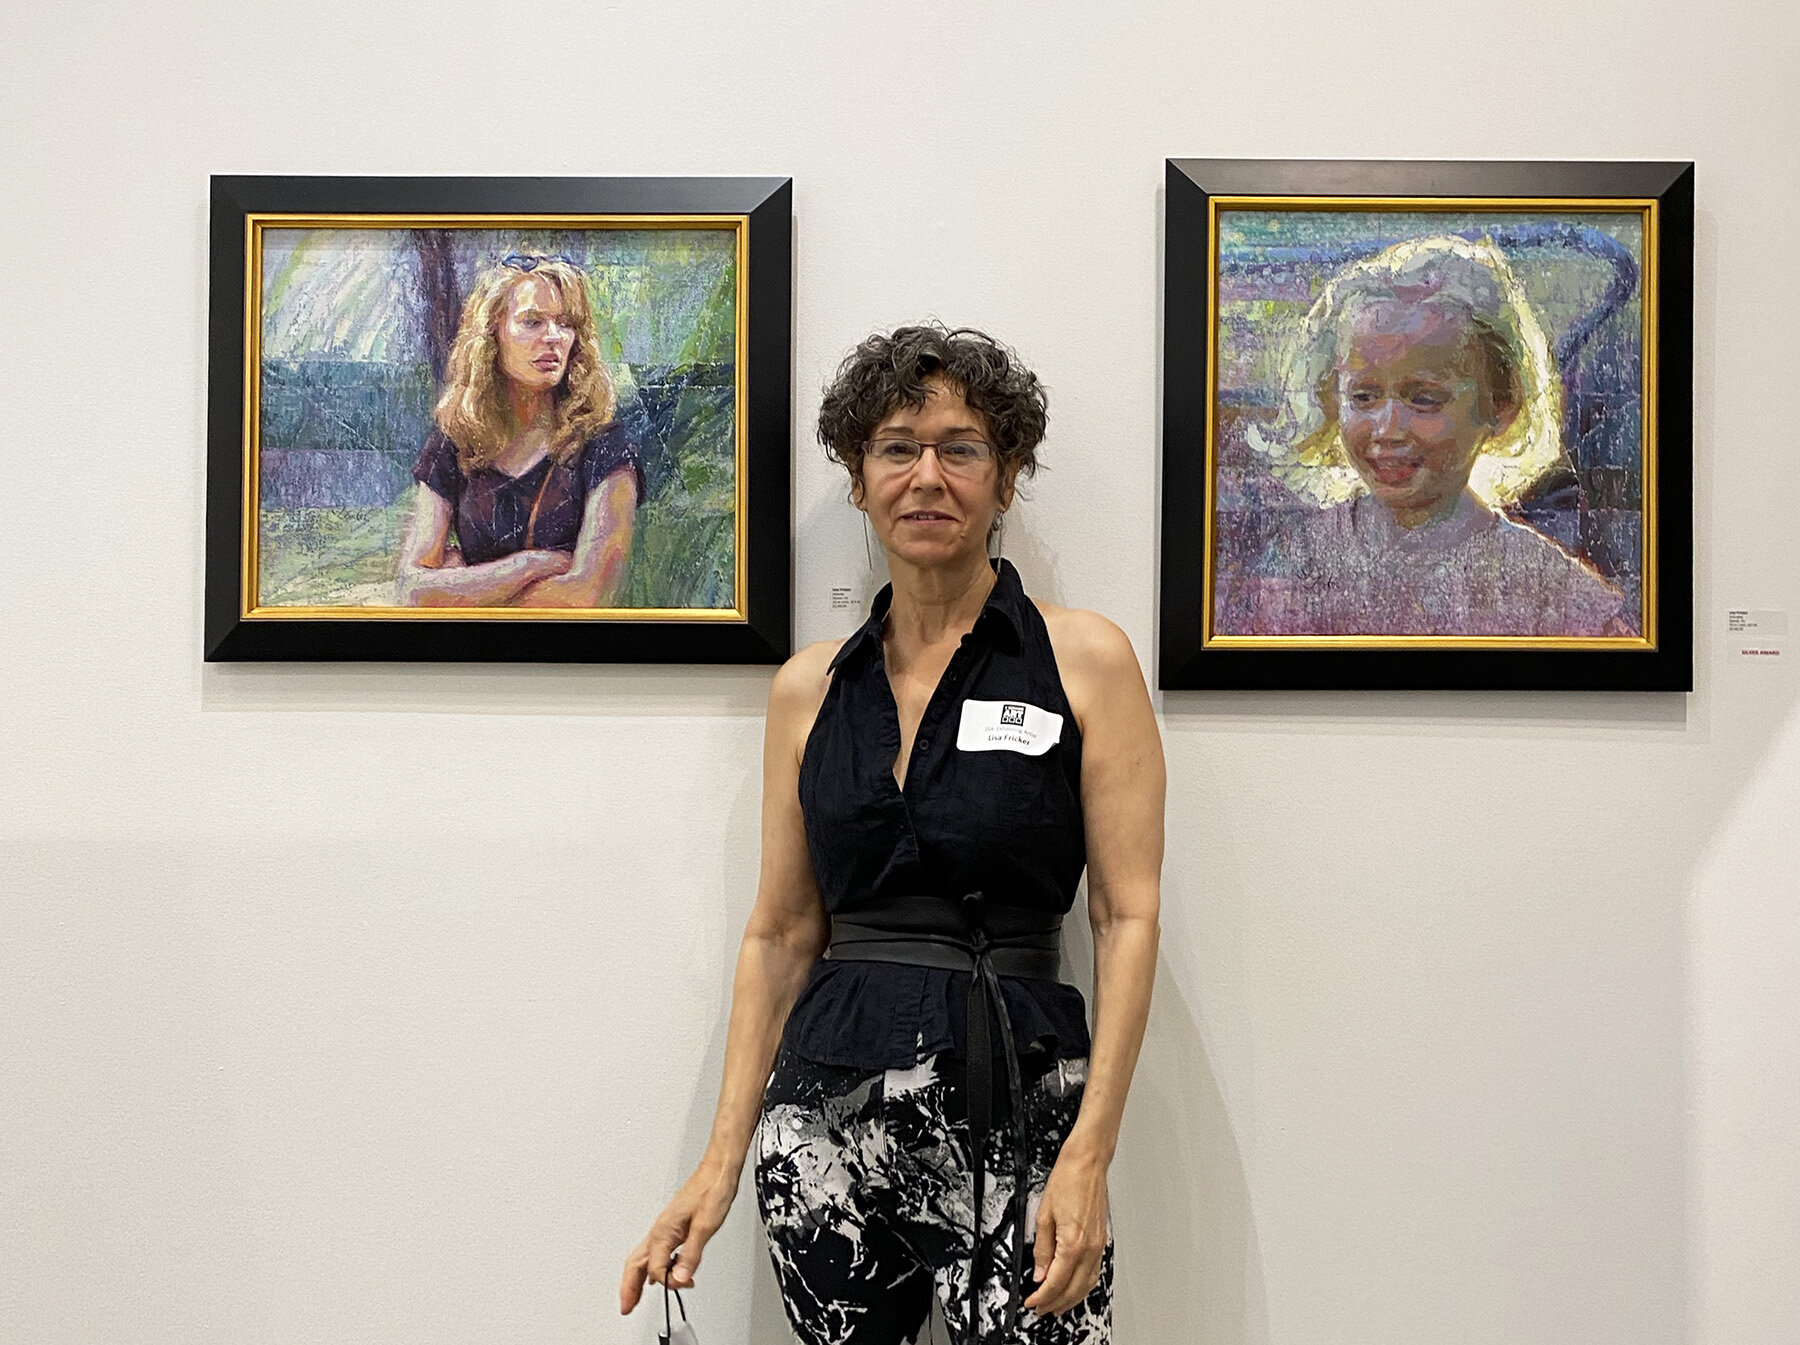   Lisa Fricker  with her paintings “Attitude” and “Unbridled” 